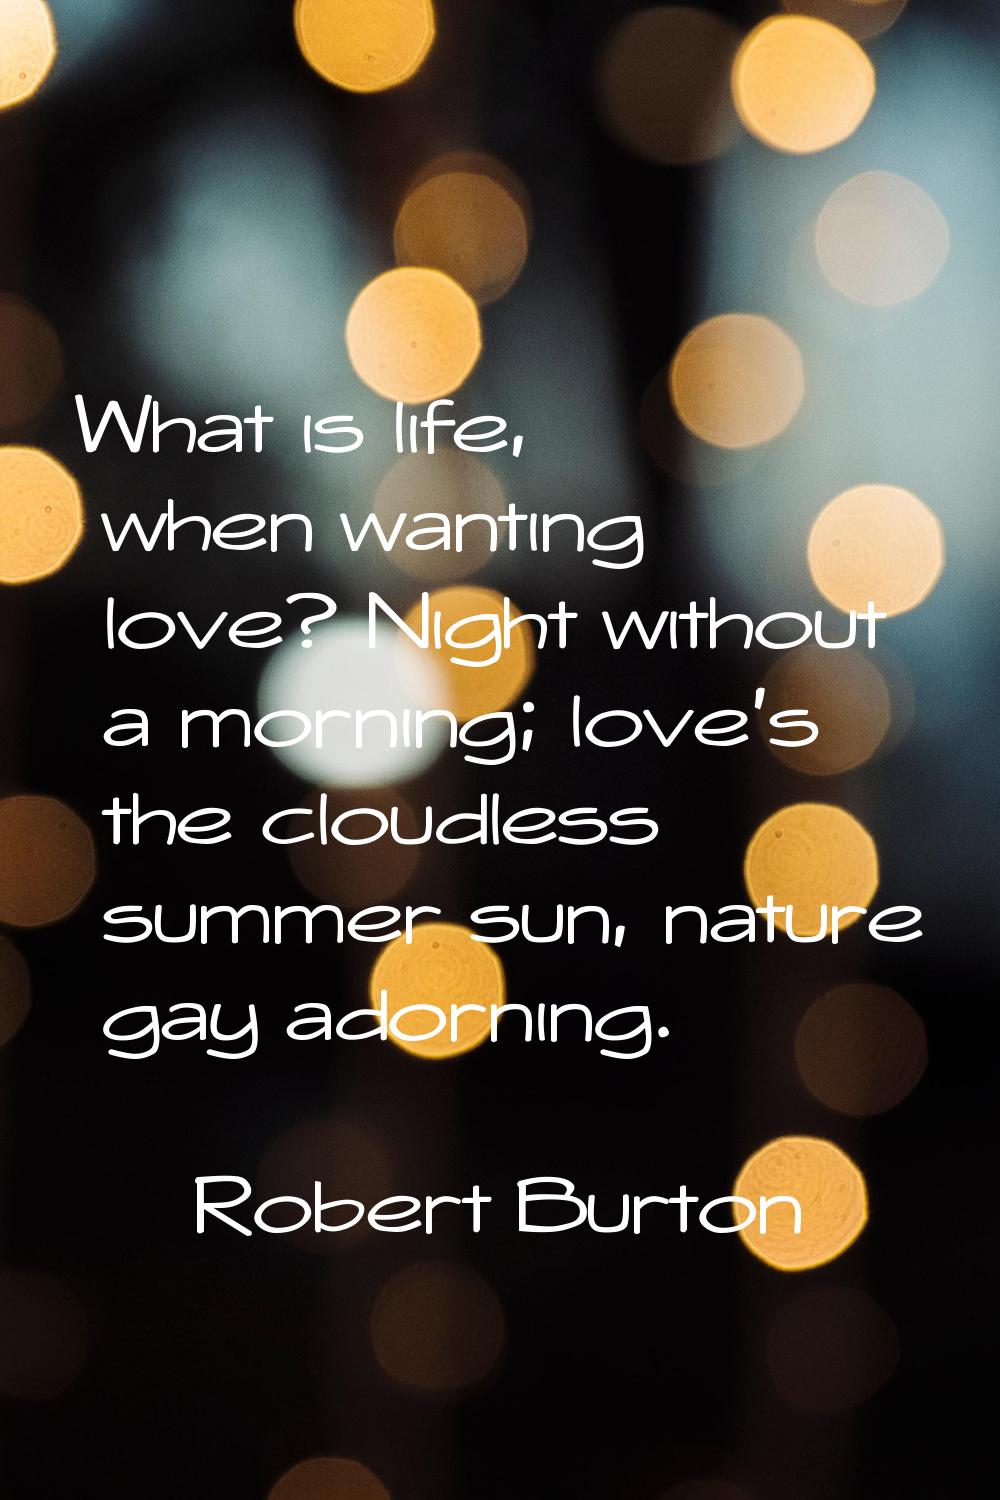 What is life, when wanting love? Night without a morning; love's the cloudless summer sun, nature g